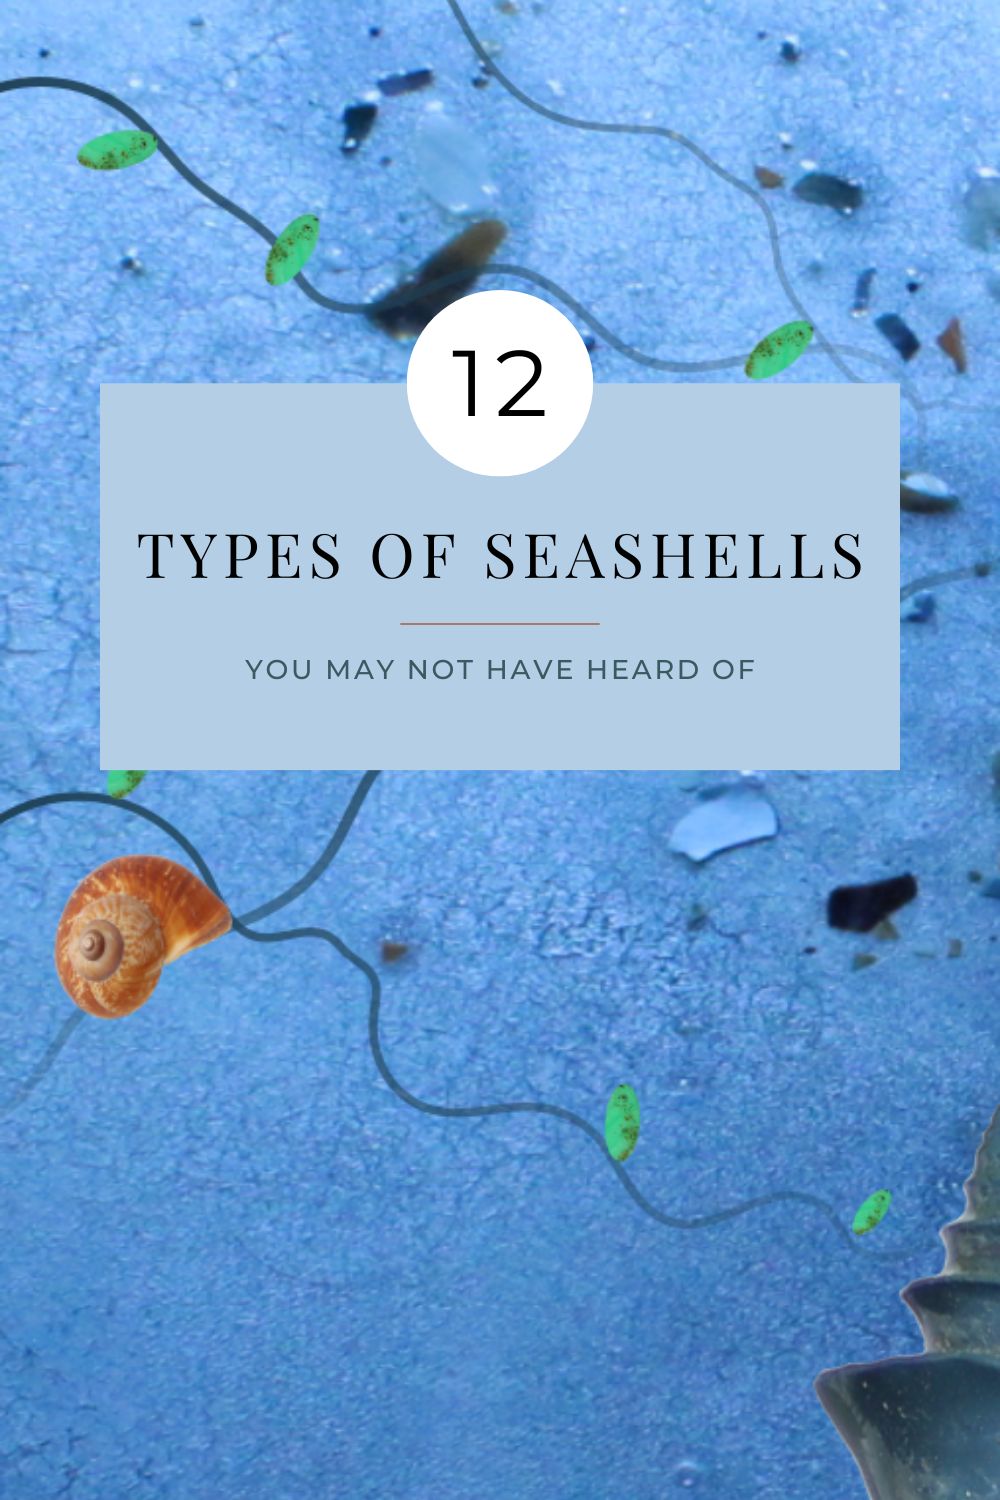 12 types of seashells I used to create coastal wall art & decor you may not have heard of, home decoration, coastal home, interior, apartment aesthetic, sea shells, seashell wall art, home decor ideas, wall decor, desk decor, living room decor ideas, blue aesthetic, blue beige brown living room, wabi sabi style, poems about self growth, my dream house, modern coastal living room, beach house, coastal style